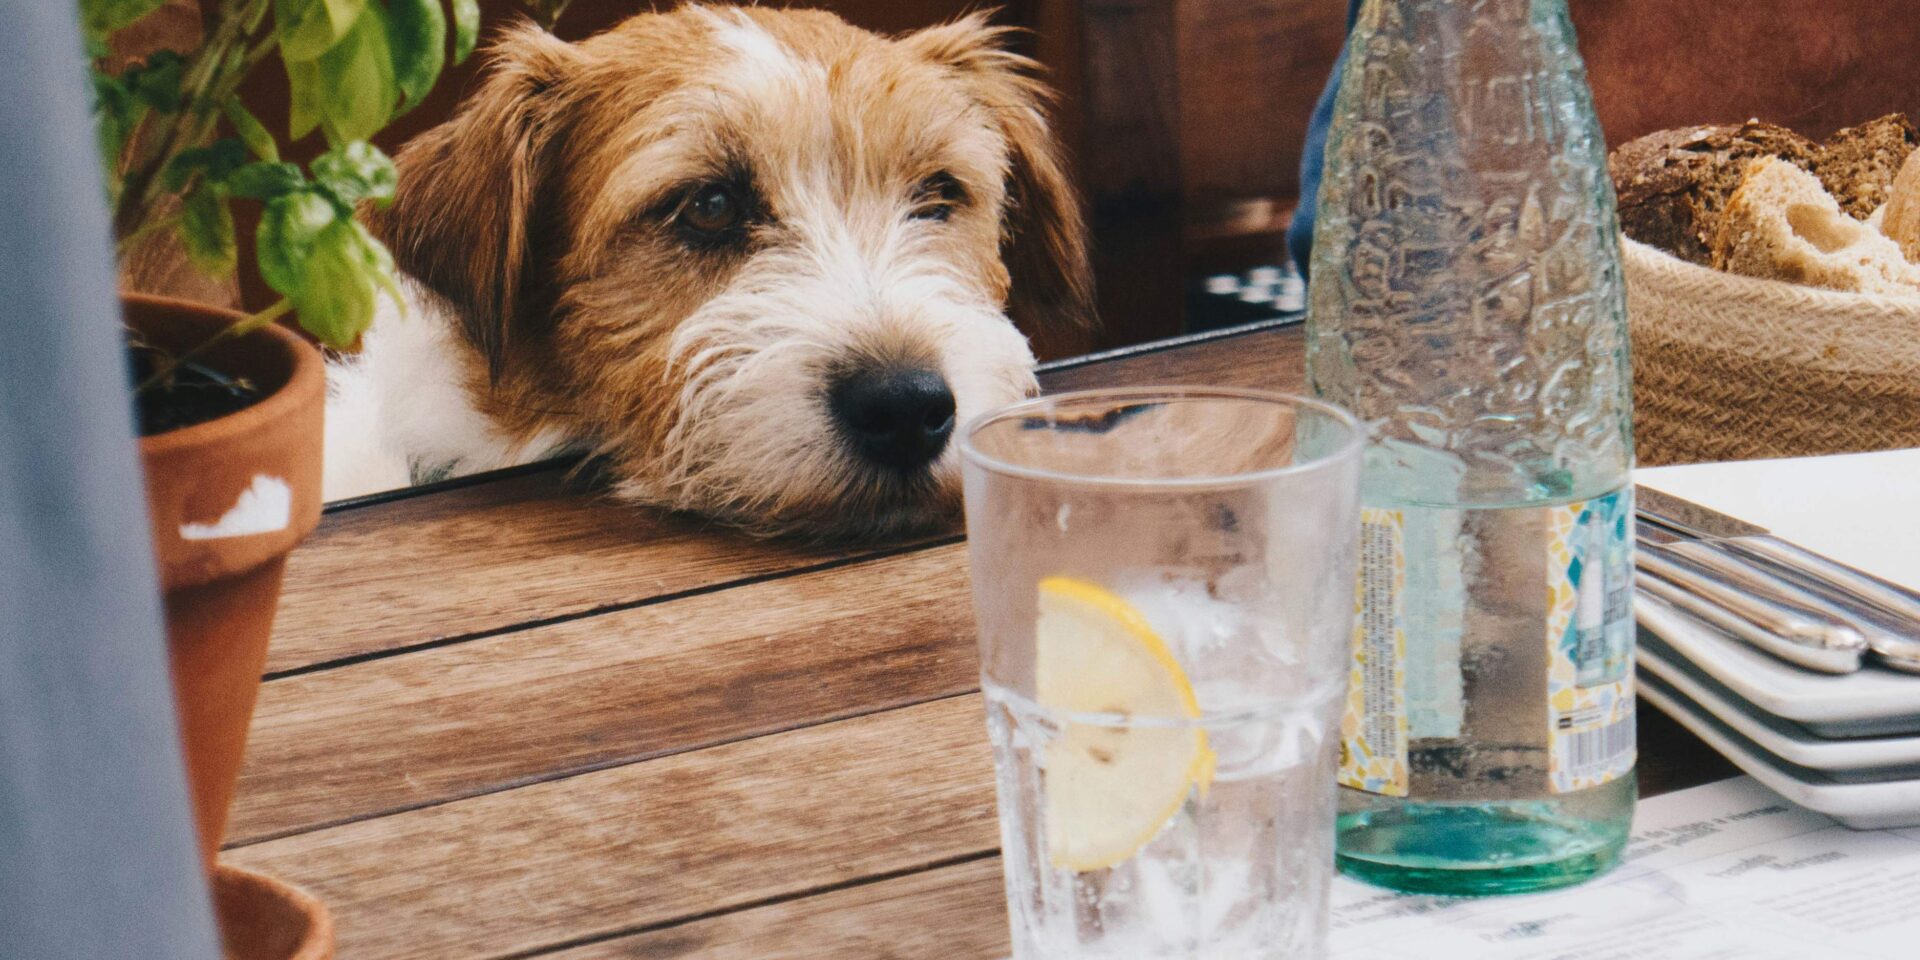 Dog leaning on table looking at glass of water